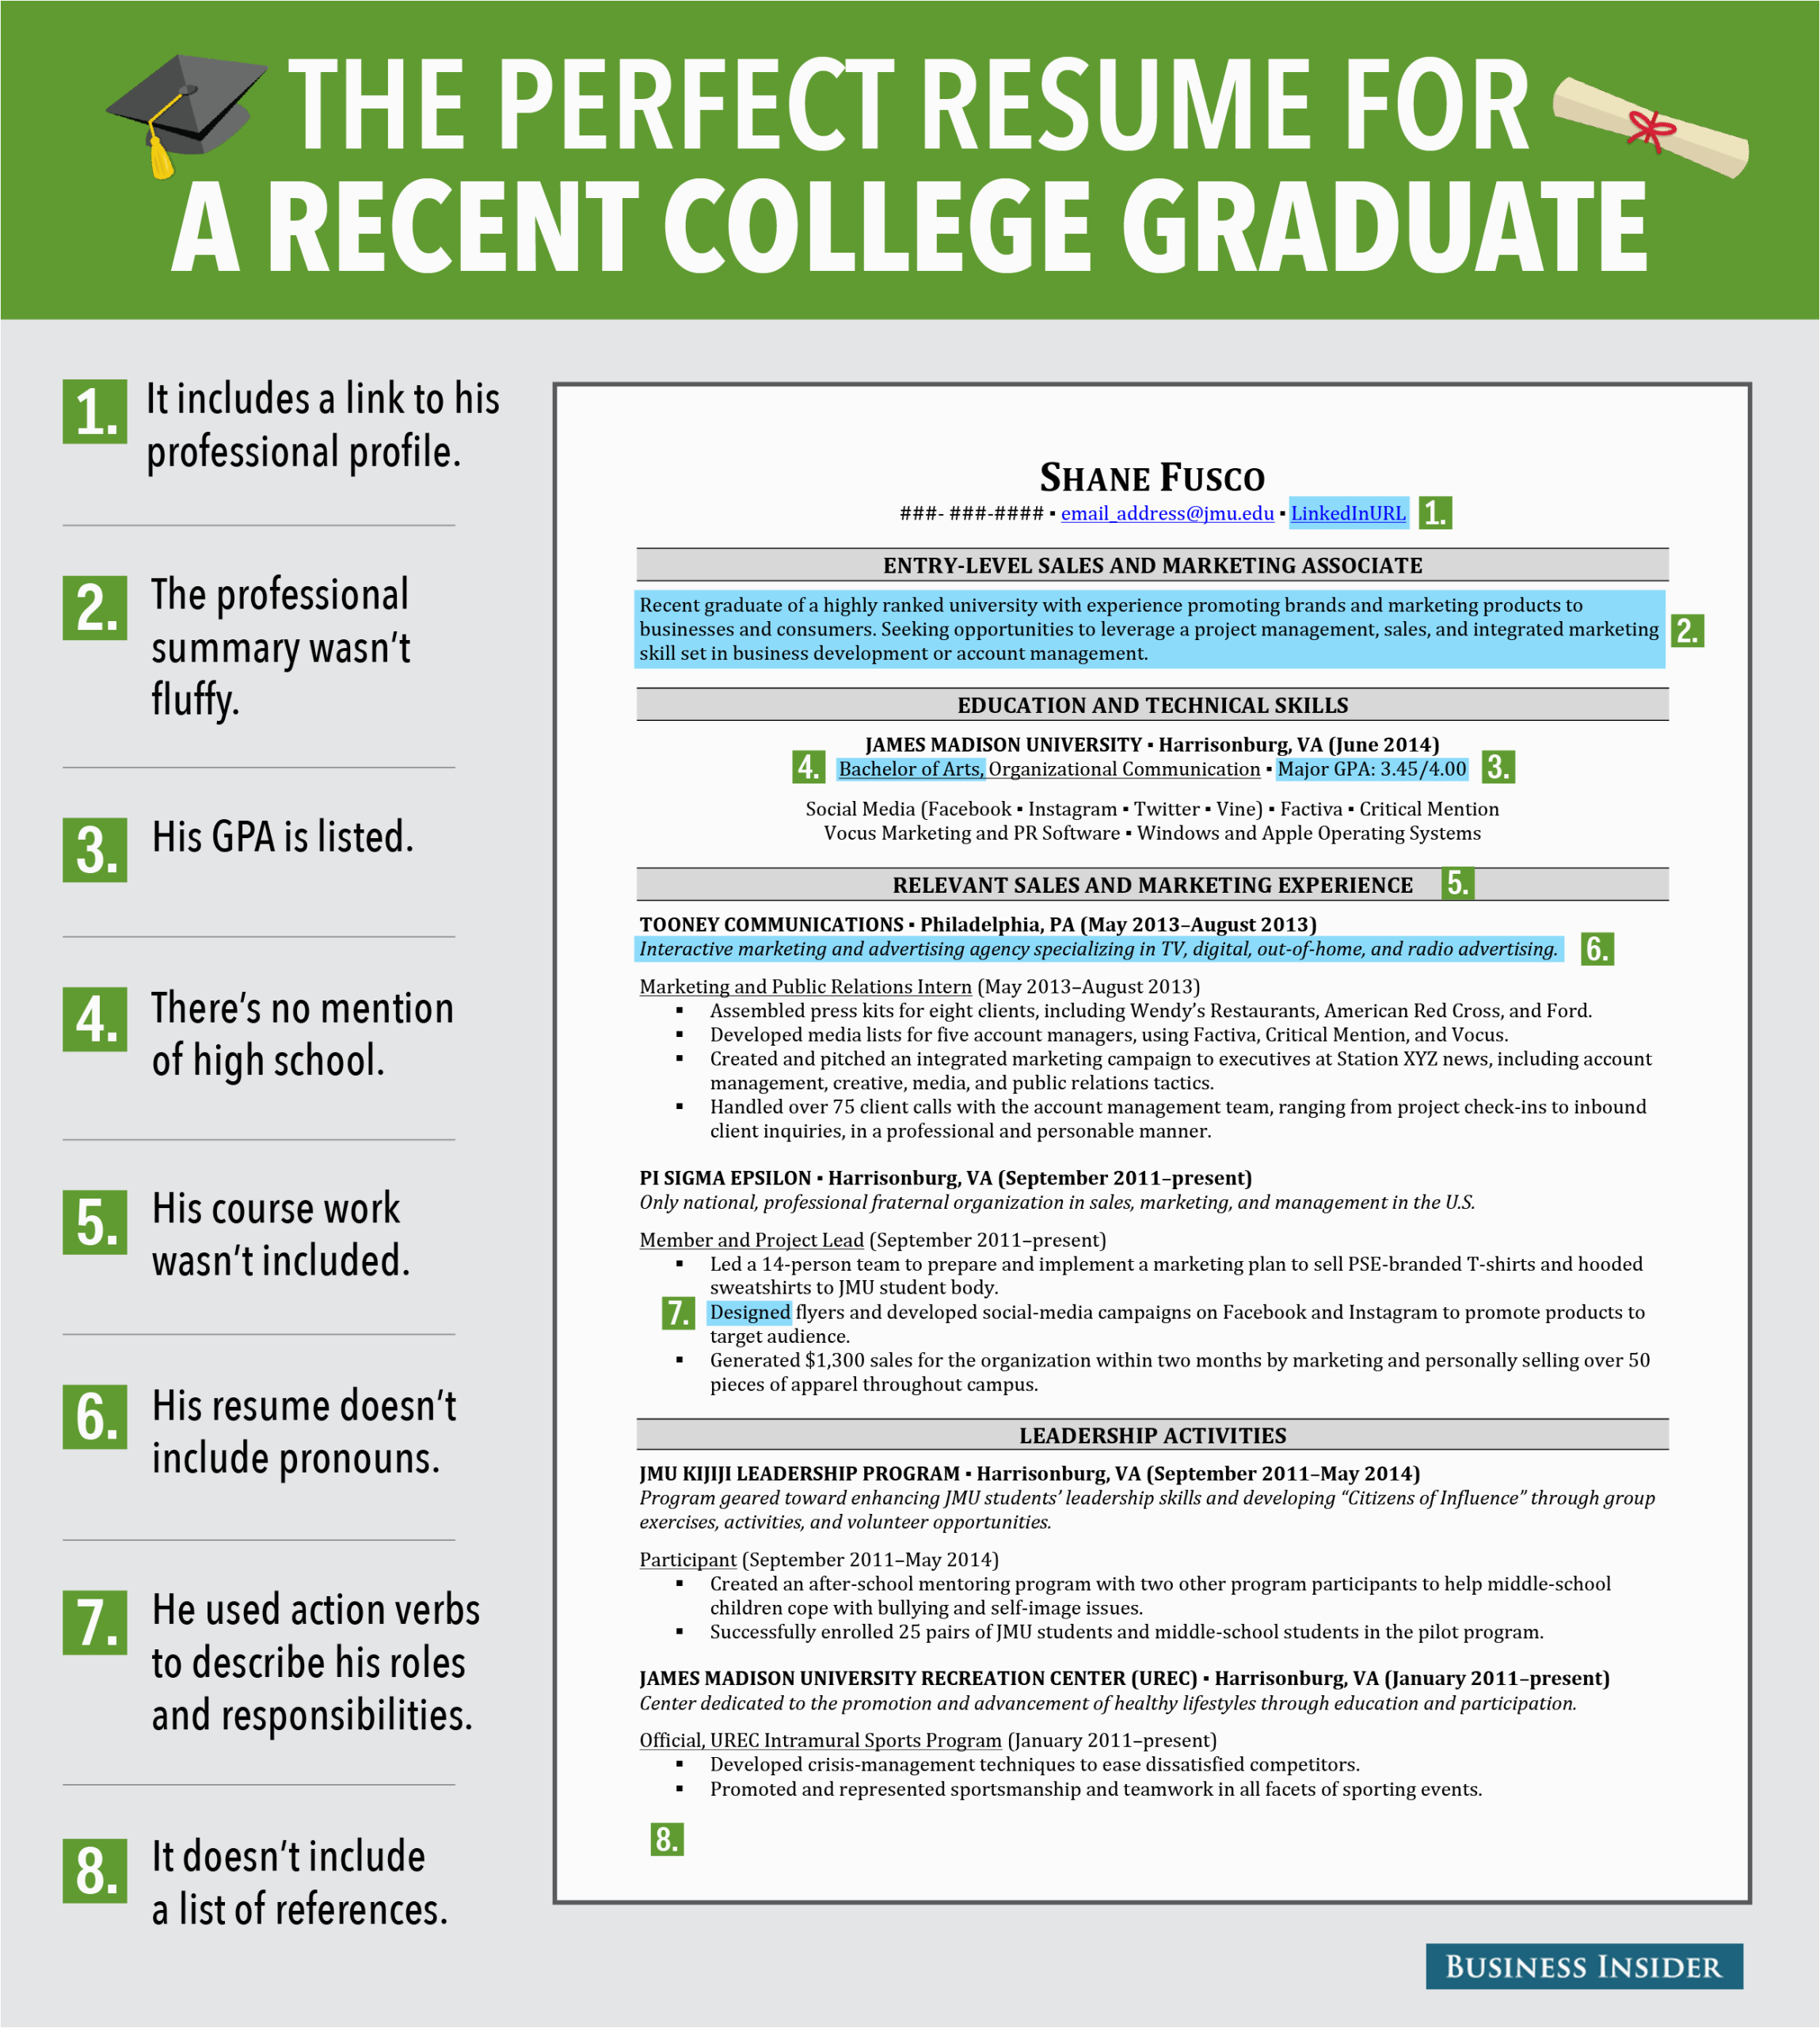 Sample Profile for Resume for New Graduate 8 Reasons This is An Excellent Resume for A Recent College Graduate